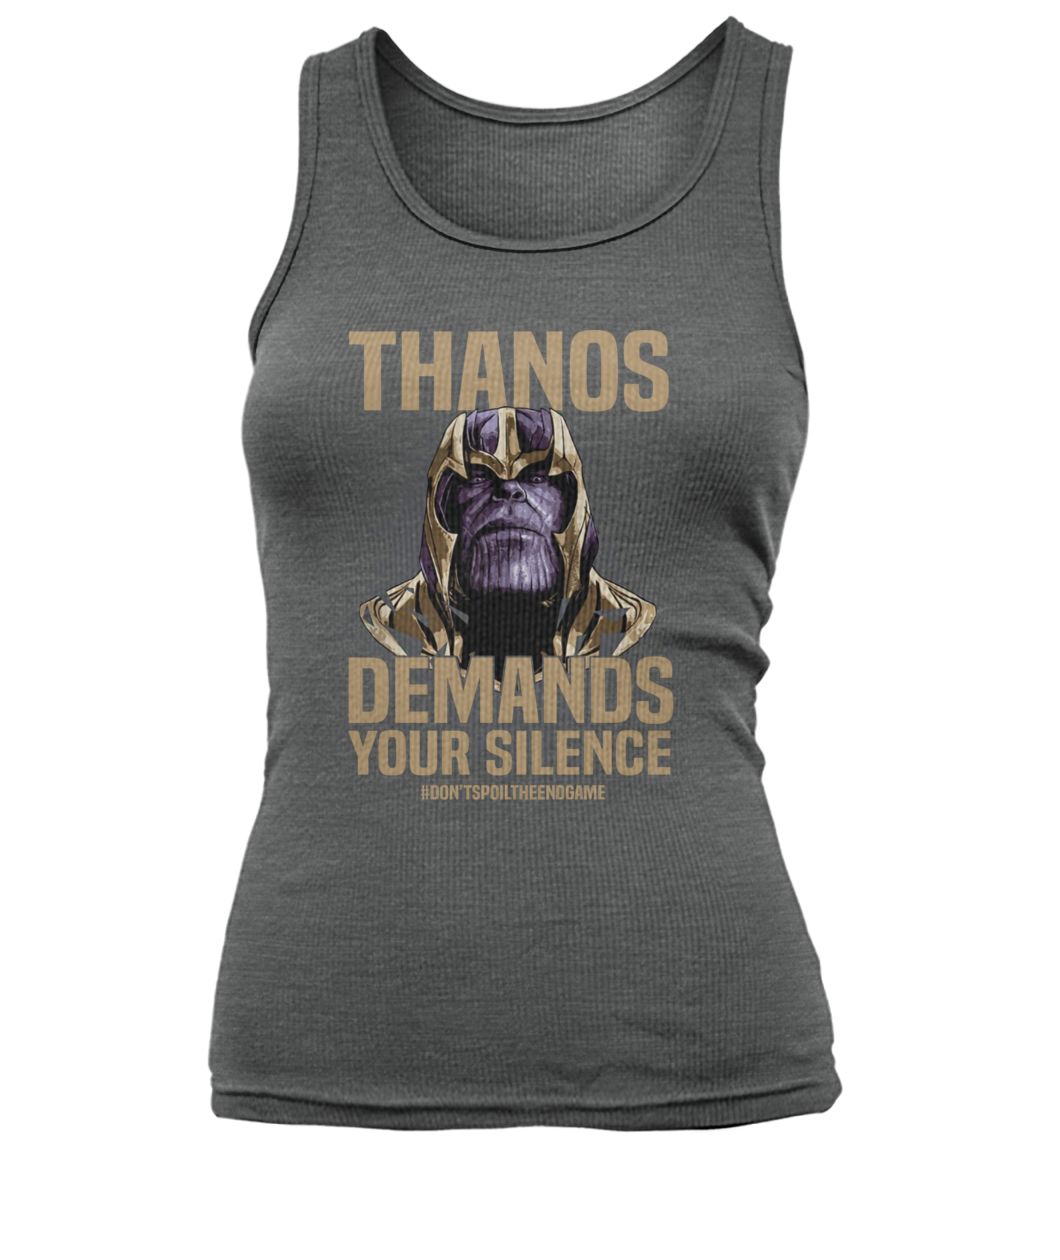 Thanos demands your silence don't spoil the endgame women's tank top